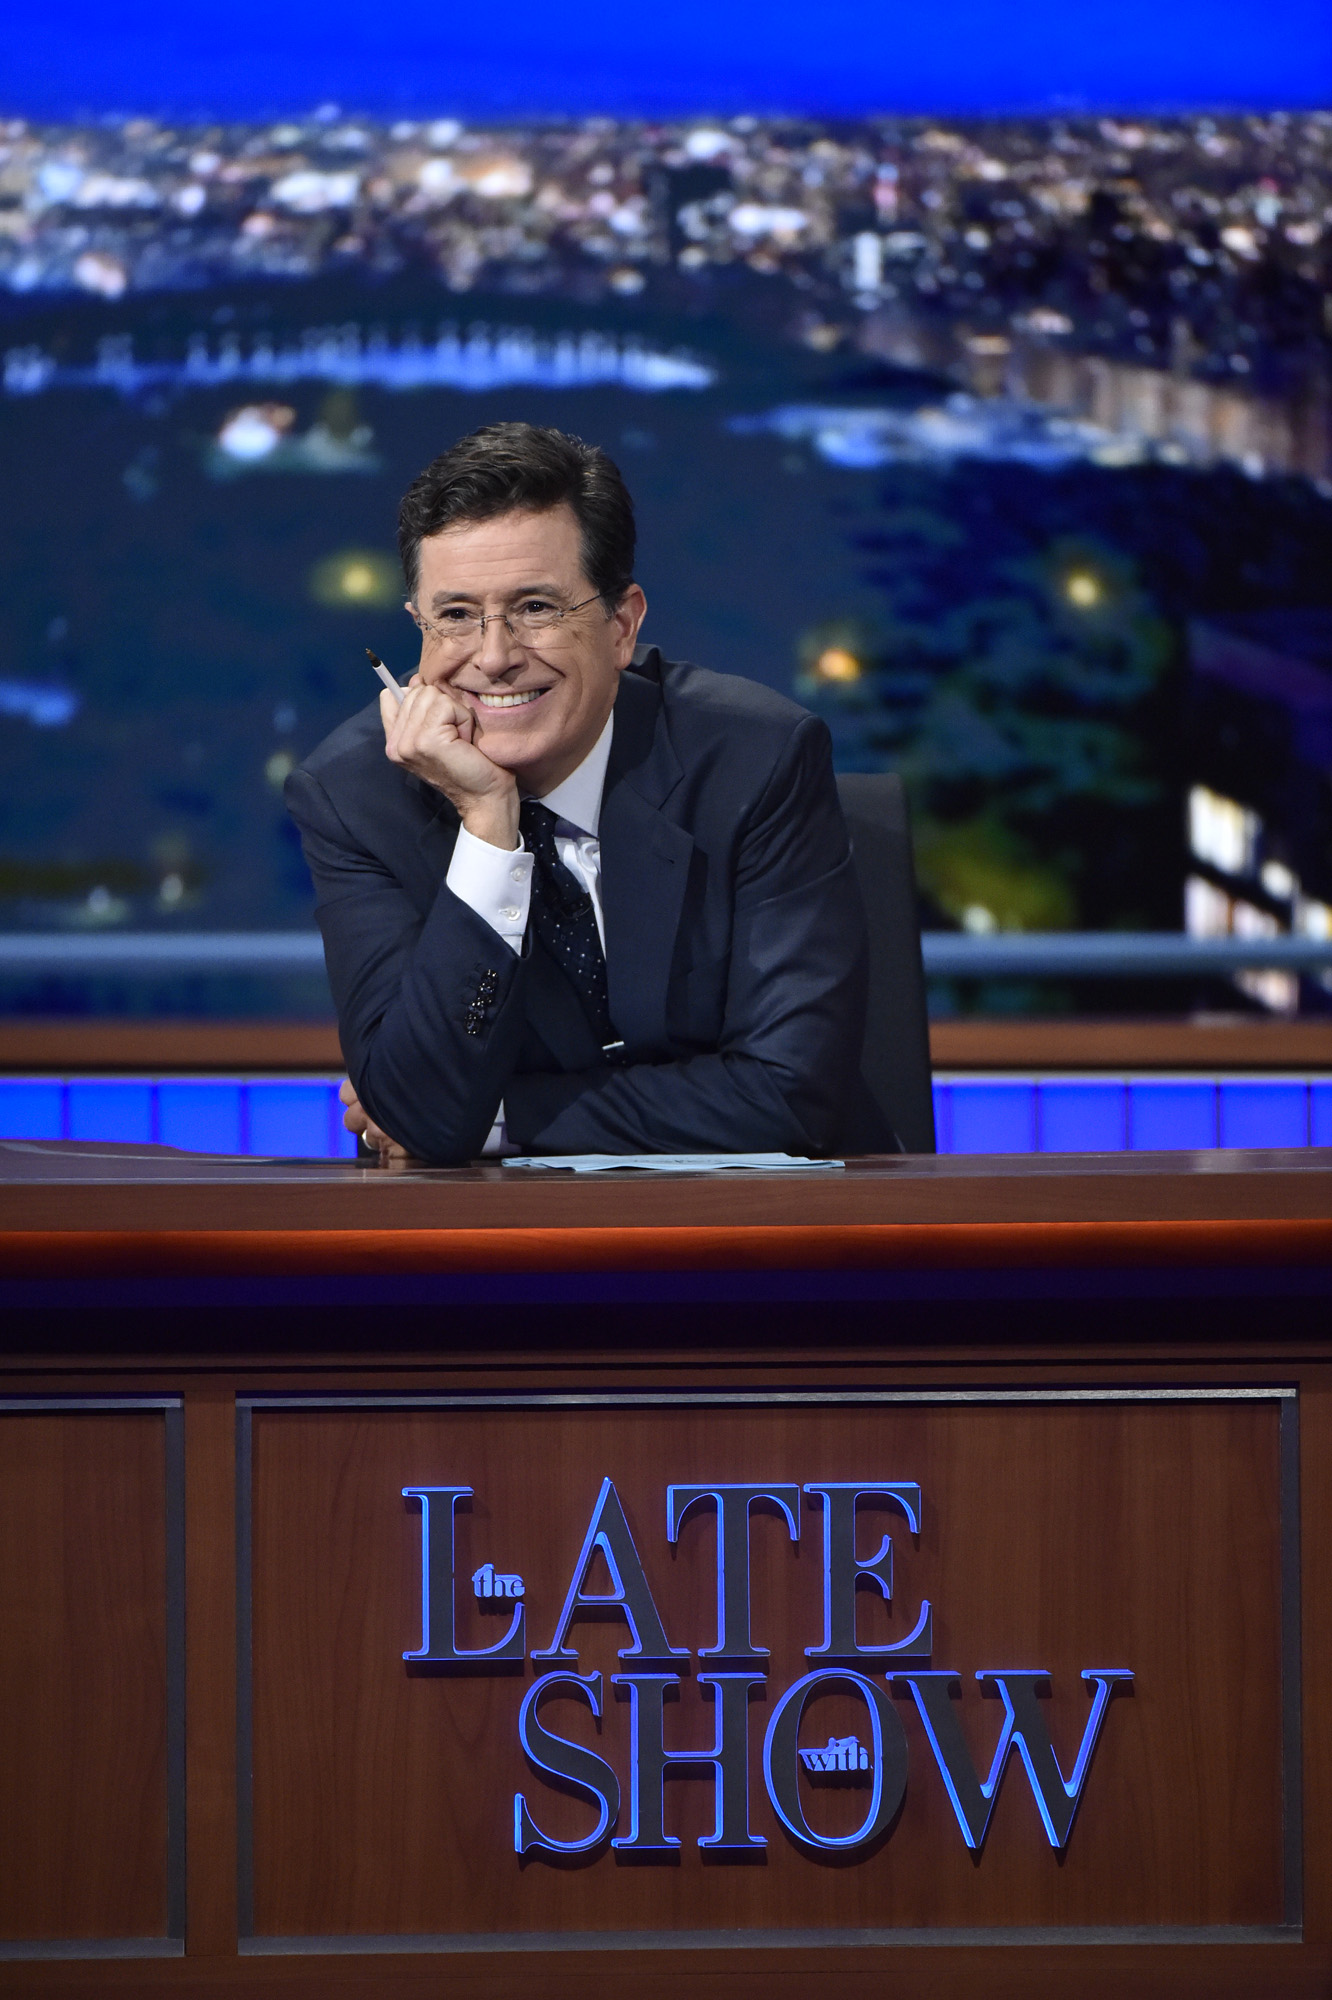 Stephen Colbert on "The Late Show with Stephen Colbert."